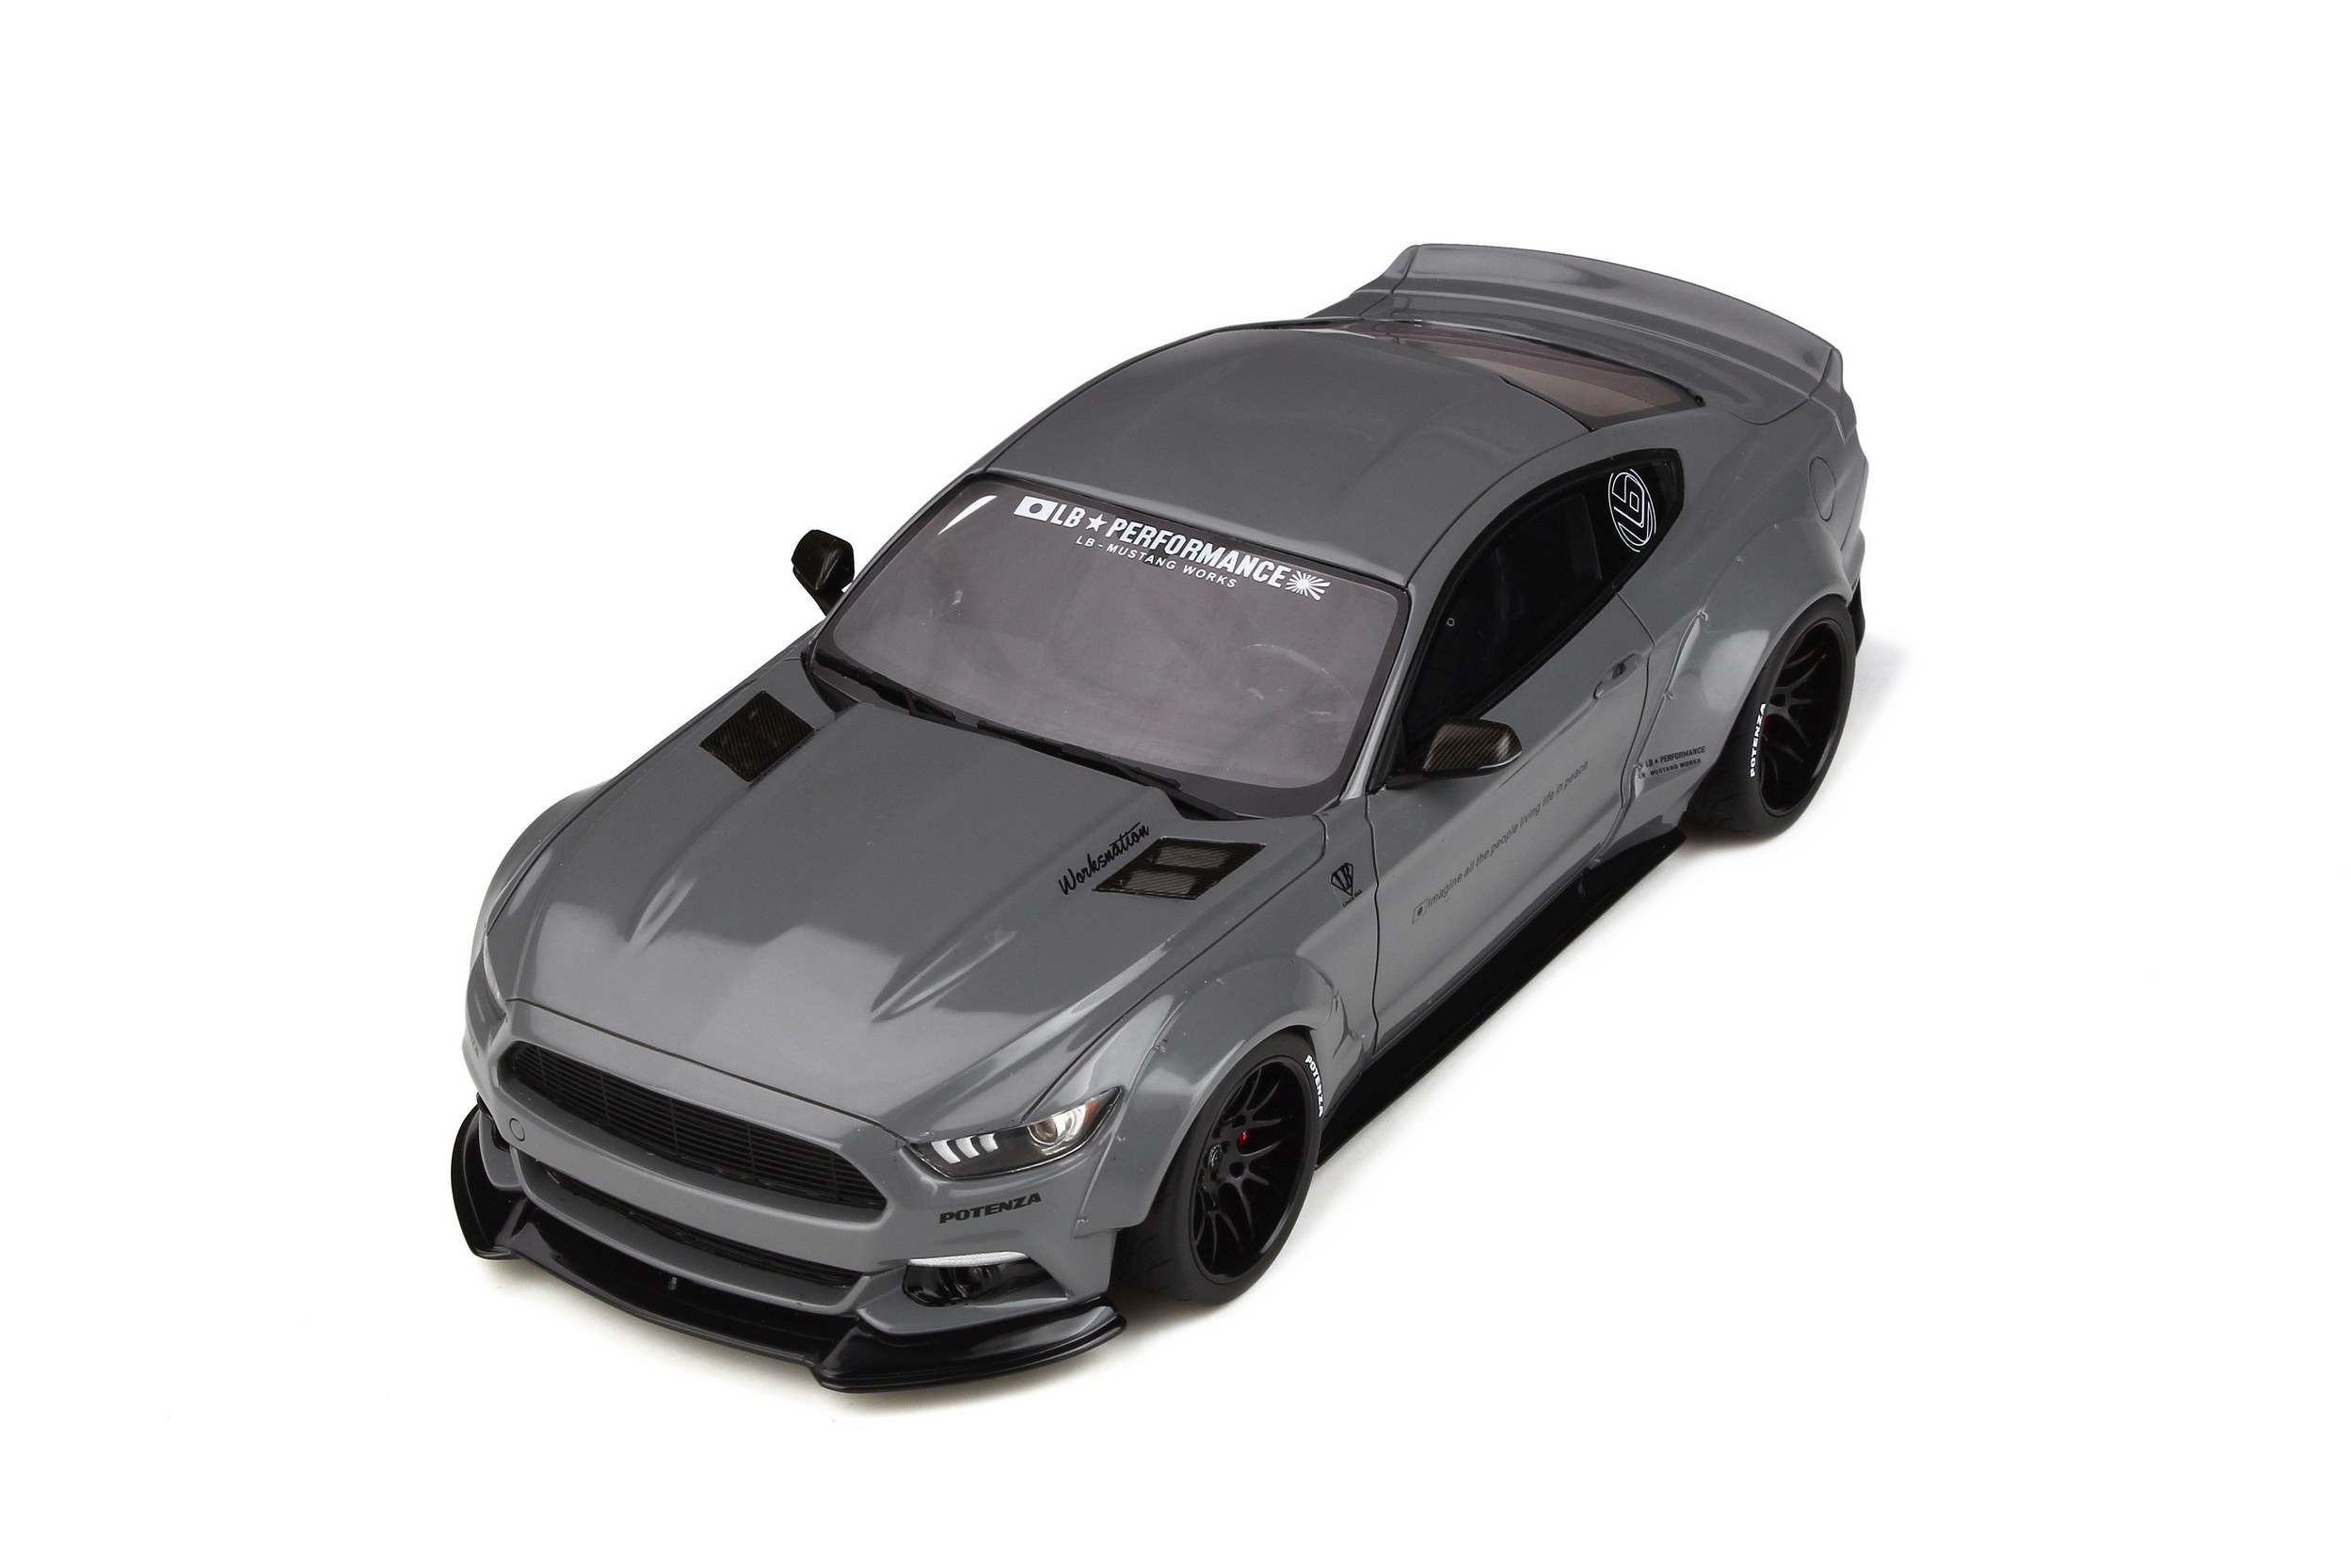 Ford Mustang Coupe by LB Works Gray 1/18 Model Car by GT Spirit GT264 